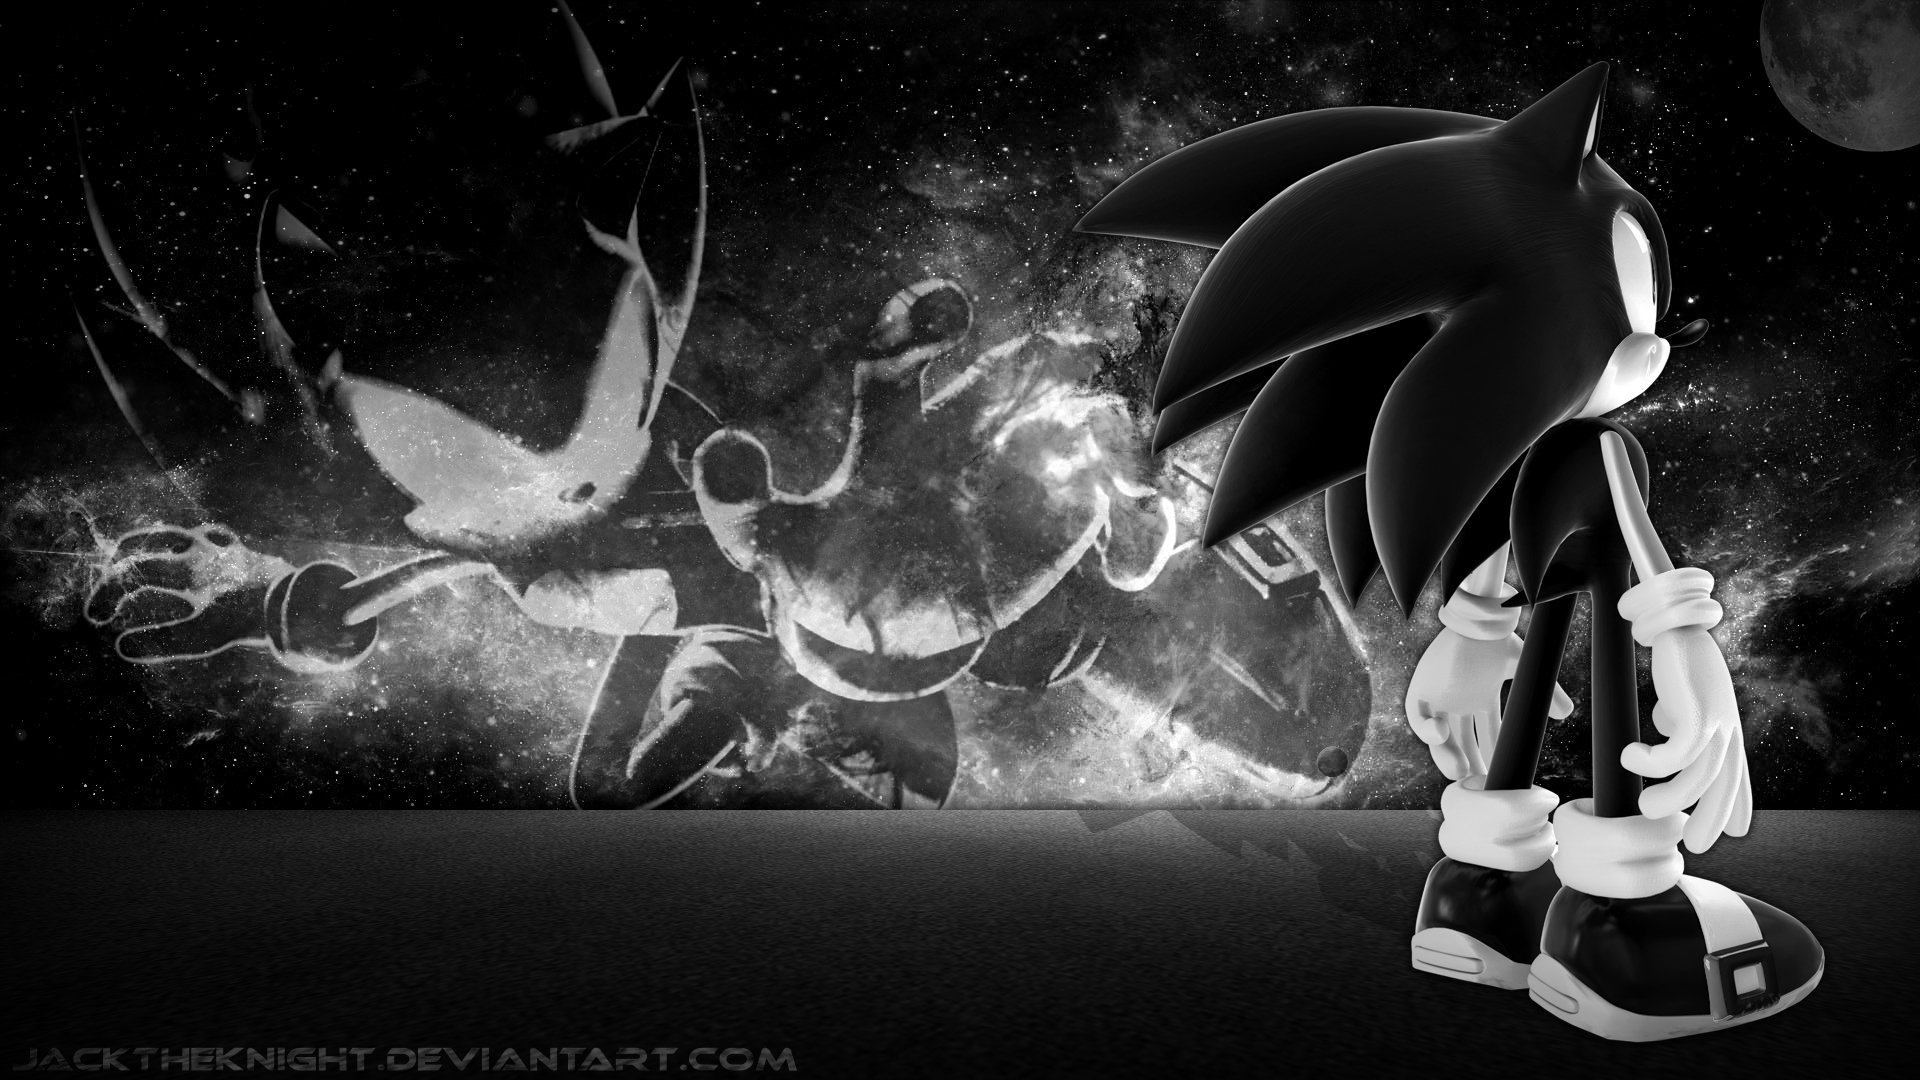 Dark Super Sonic Images  Icons Wallpapers and Photos on Fanpop